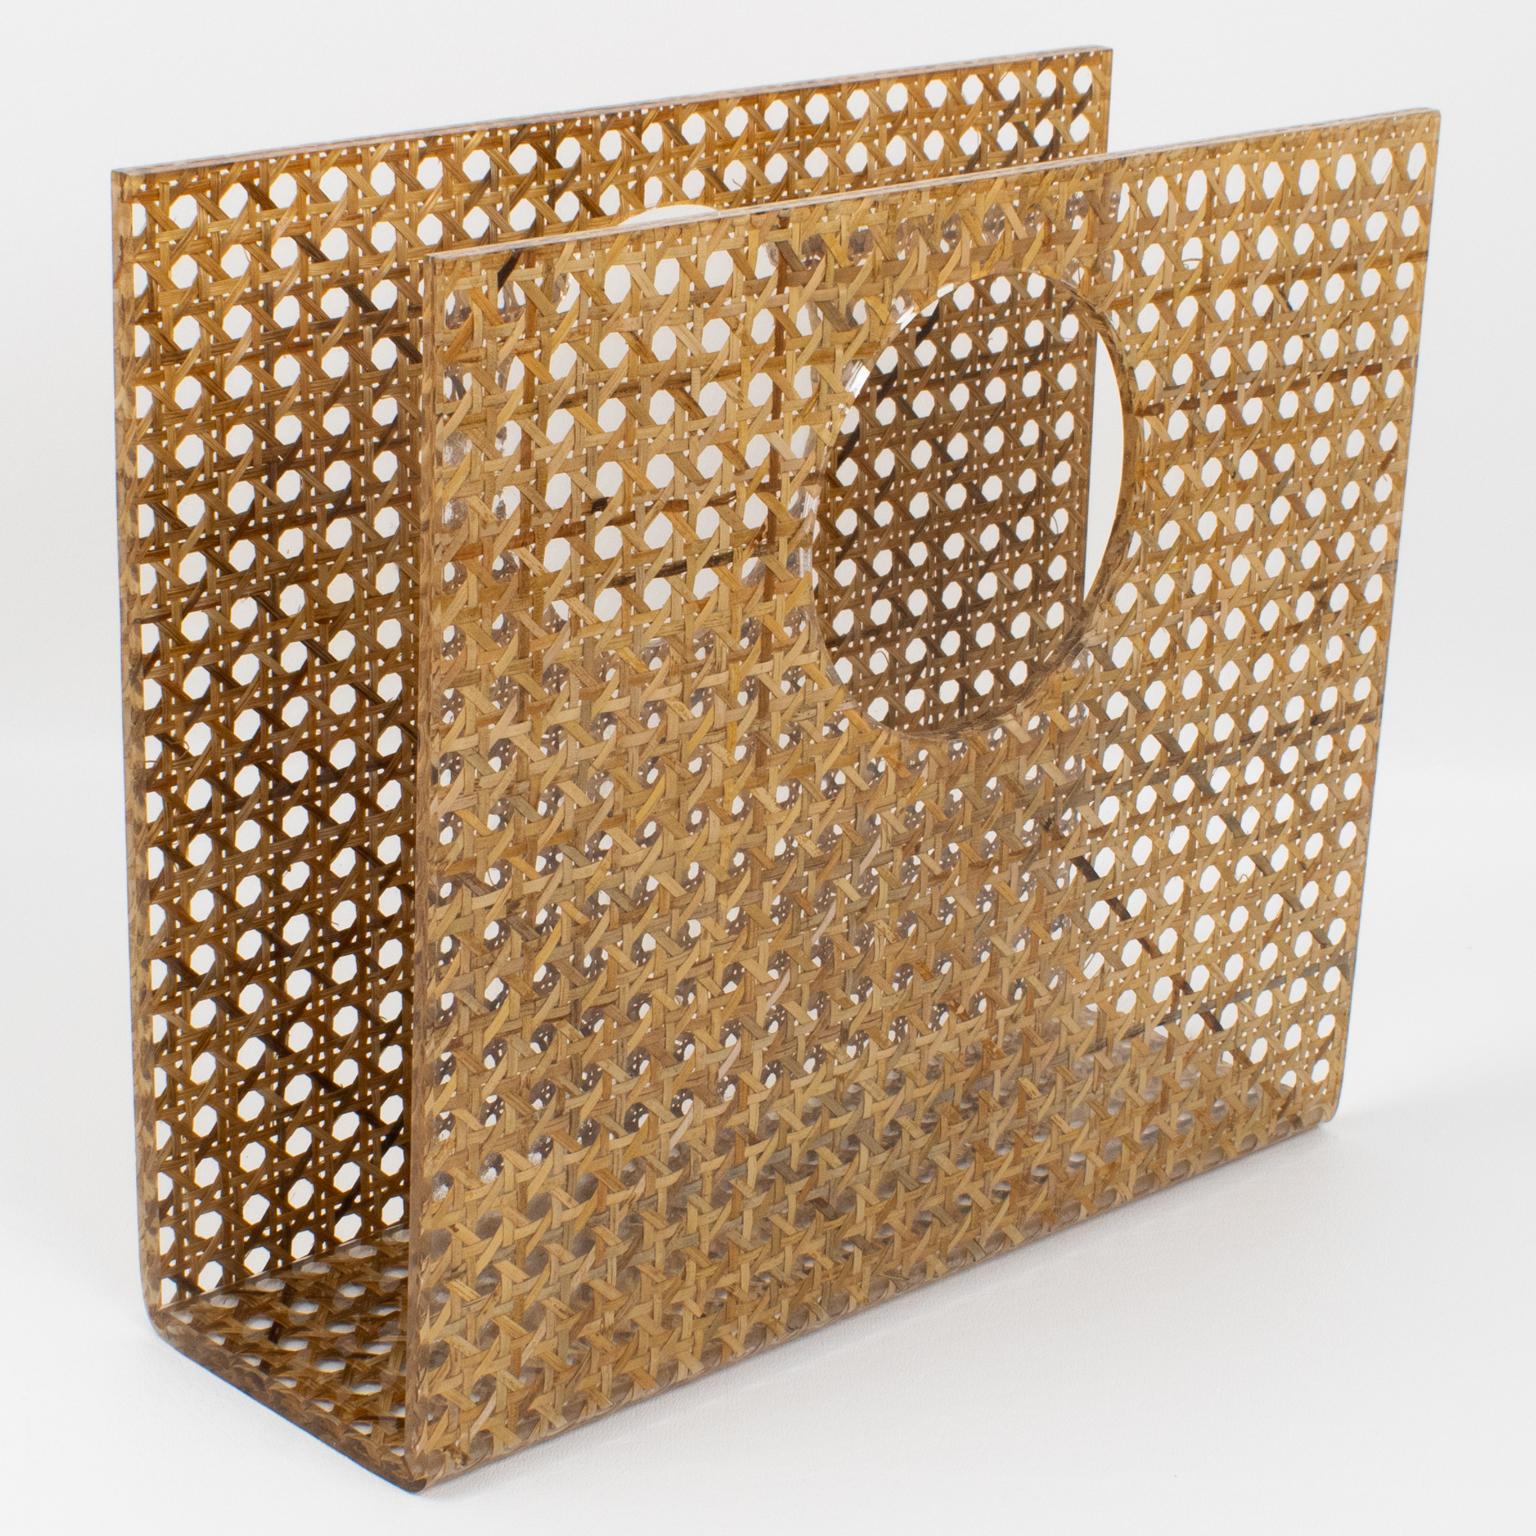 This beautiful magazine rack, holder, or stand was designed and crafted in Italy for the Christian Dior Home Collection in the 1970s. The geometric 